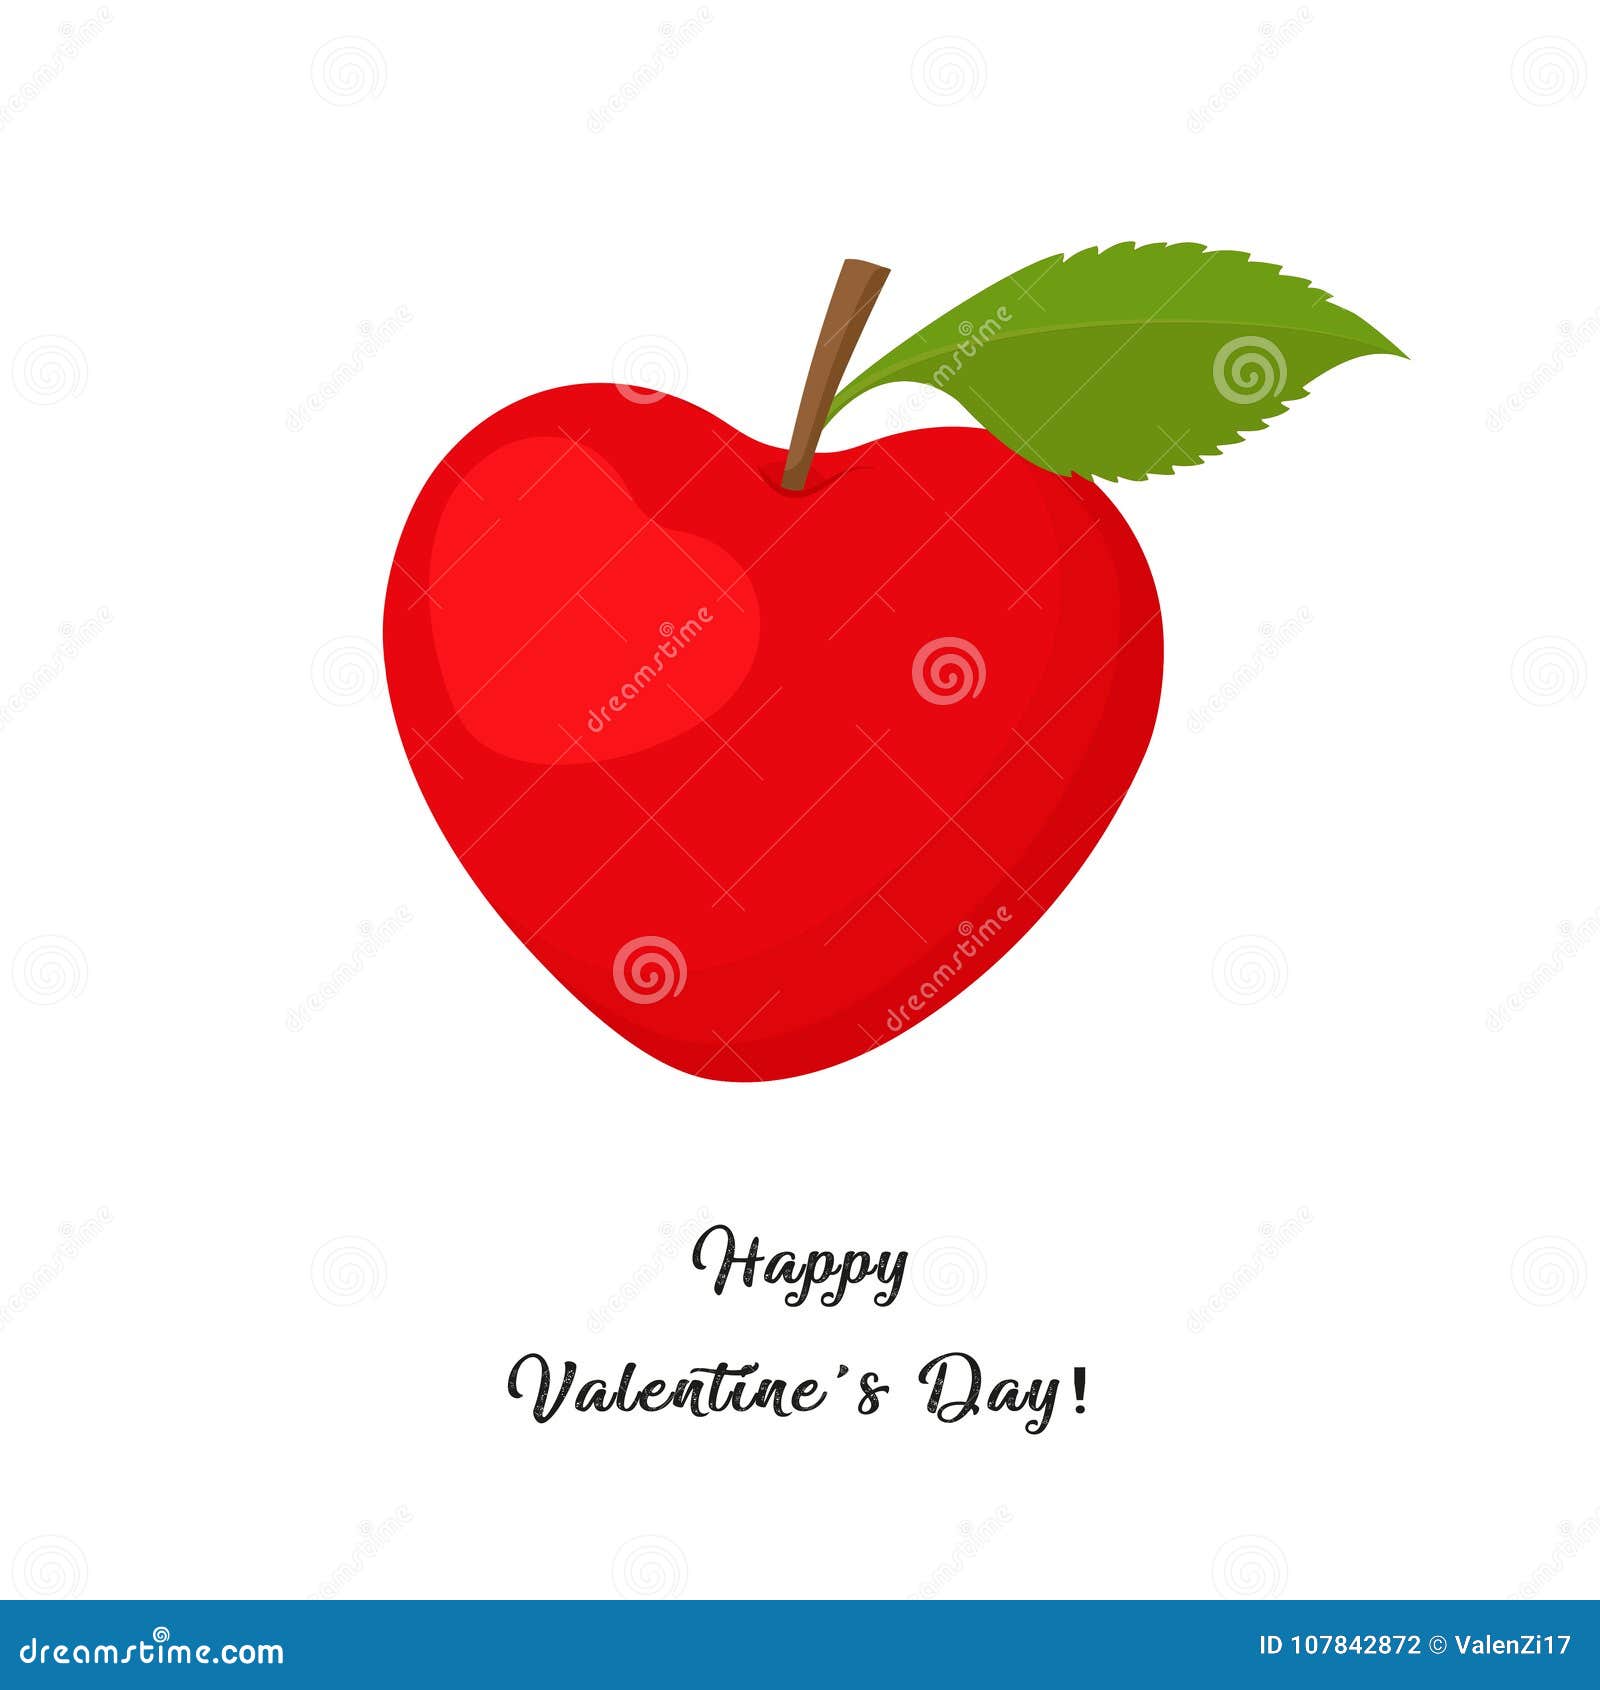 Valentines day, apple. Valentines day greeting card, red apple heart, greeting inscription, Happy Valentine`s Day